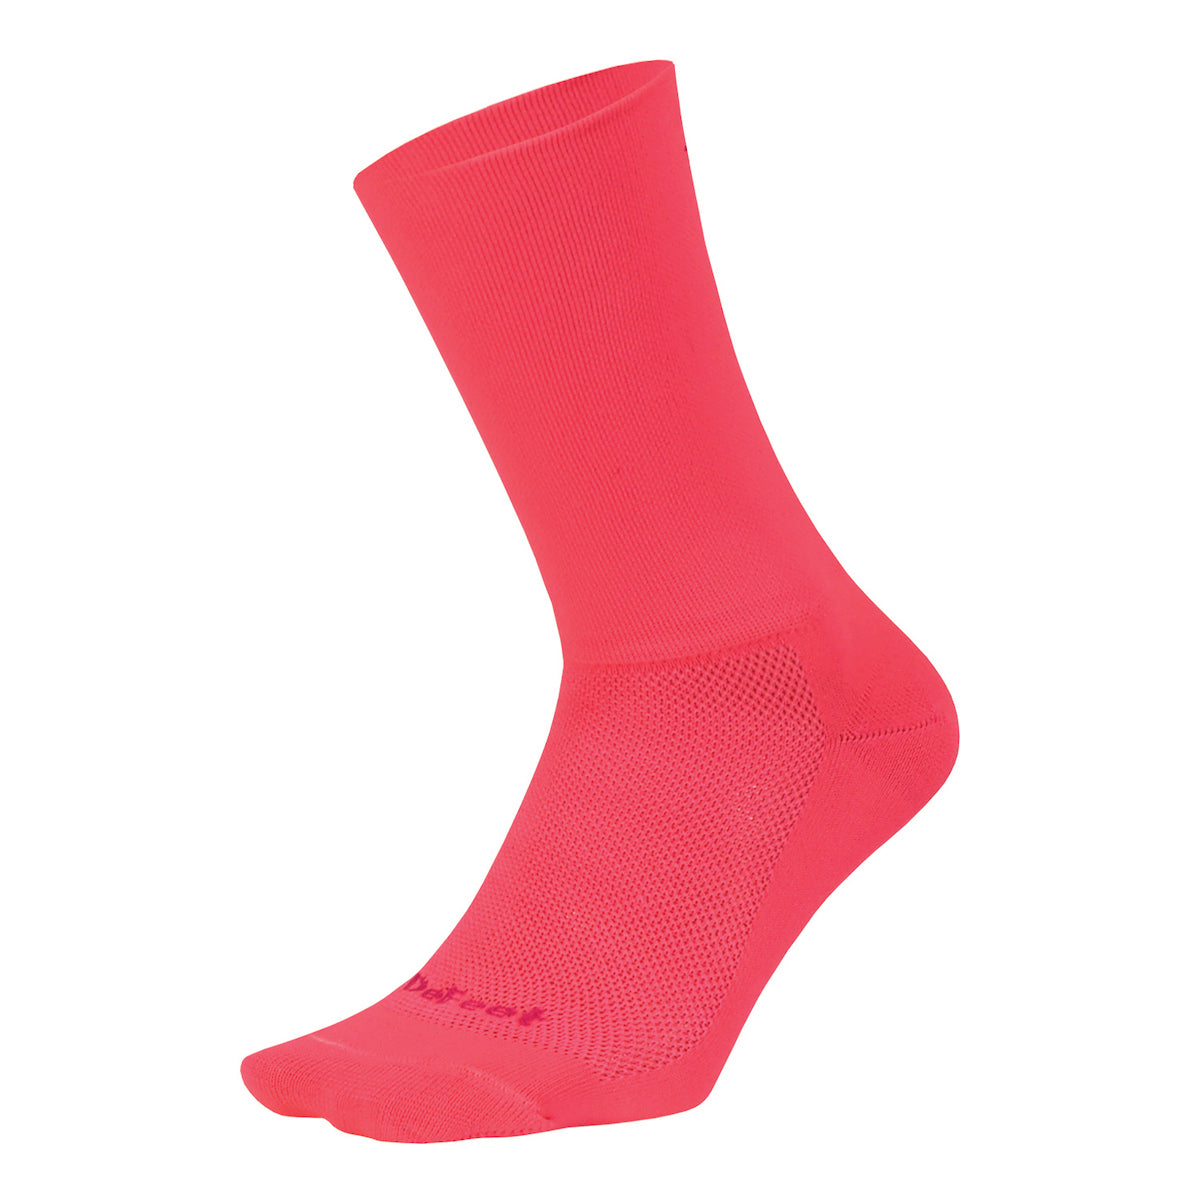 DeFeet Aireator 6" D-Logo cycling sock with 6" double cuff in hi-vis pink